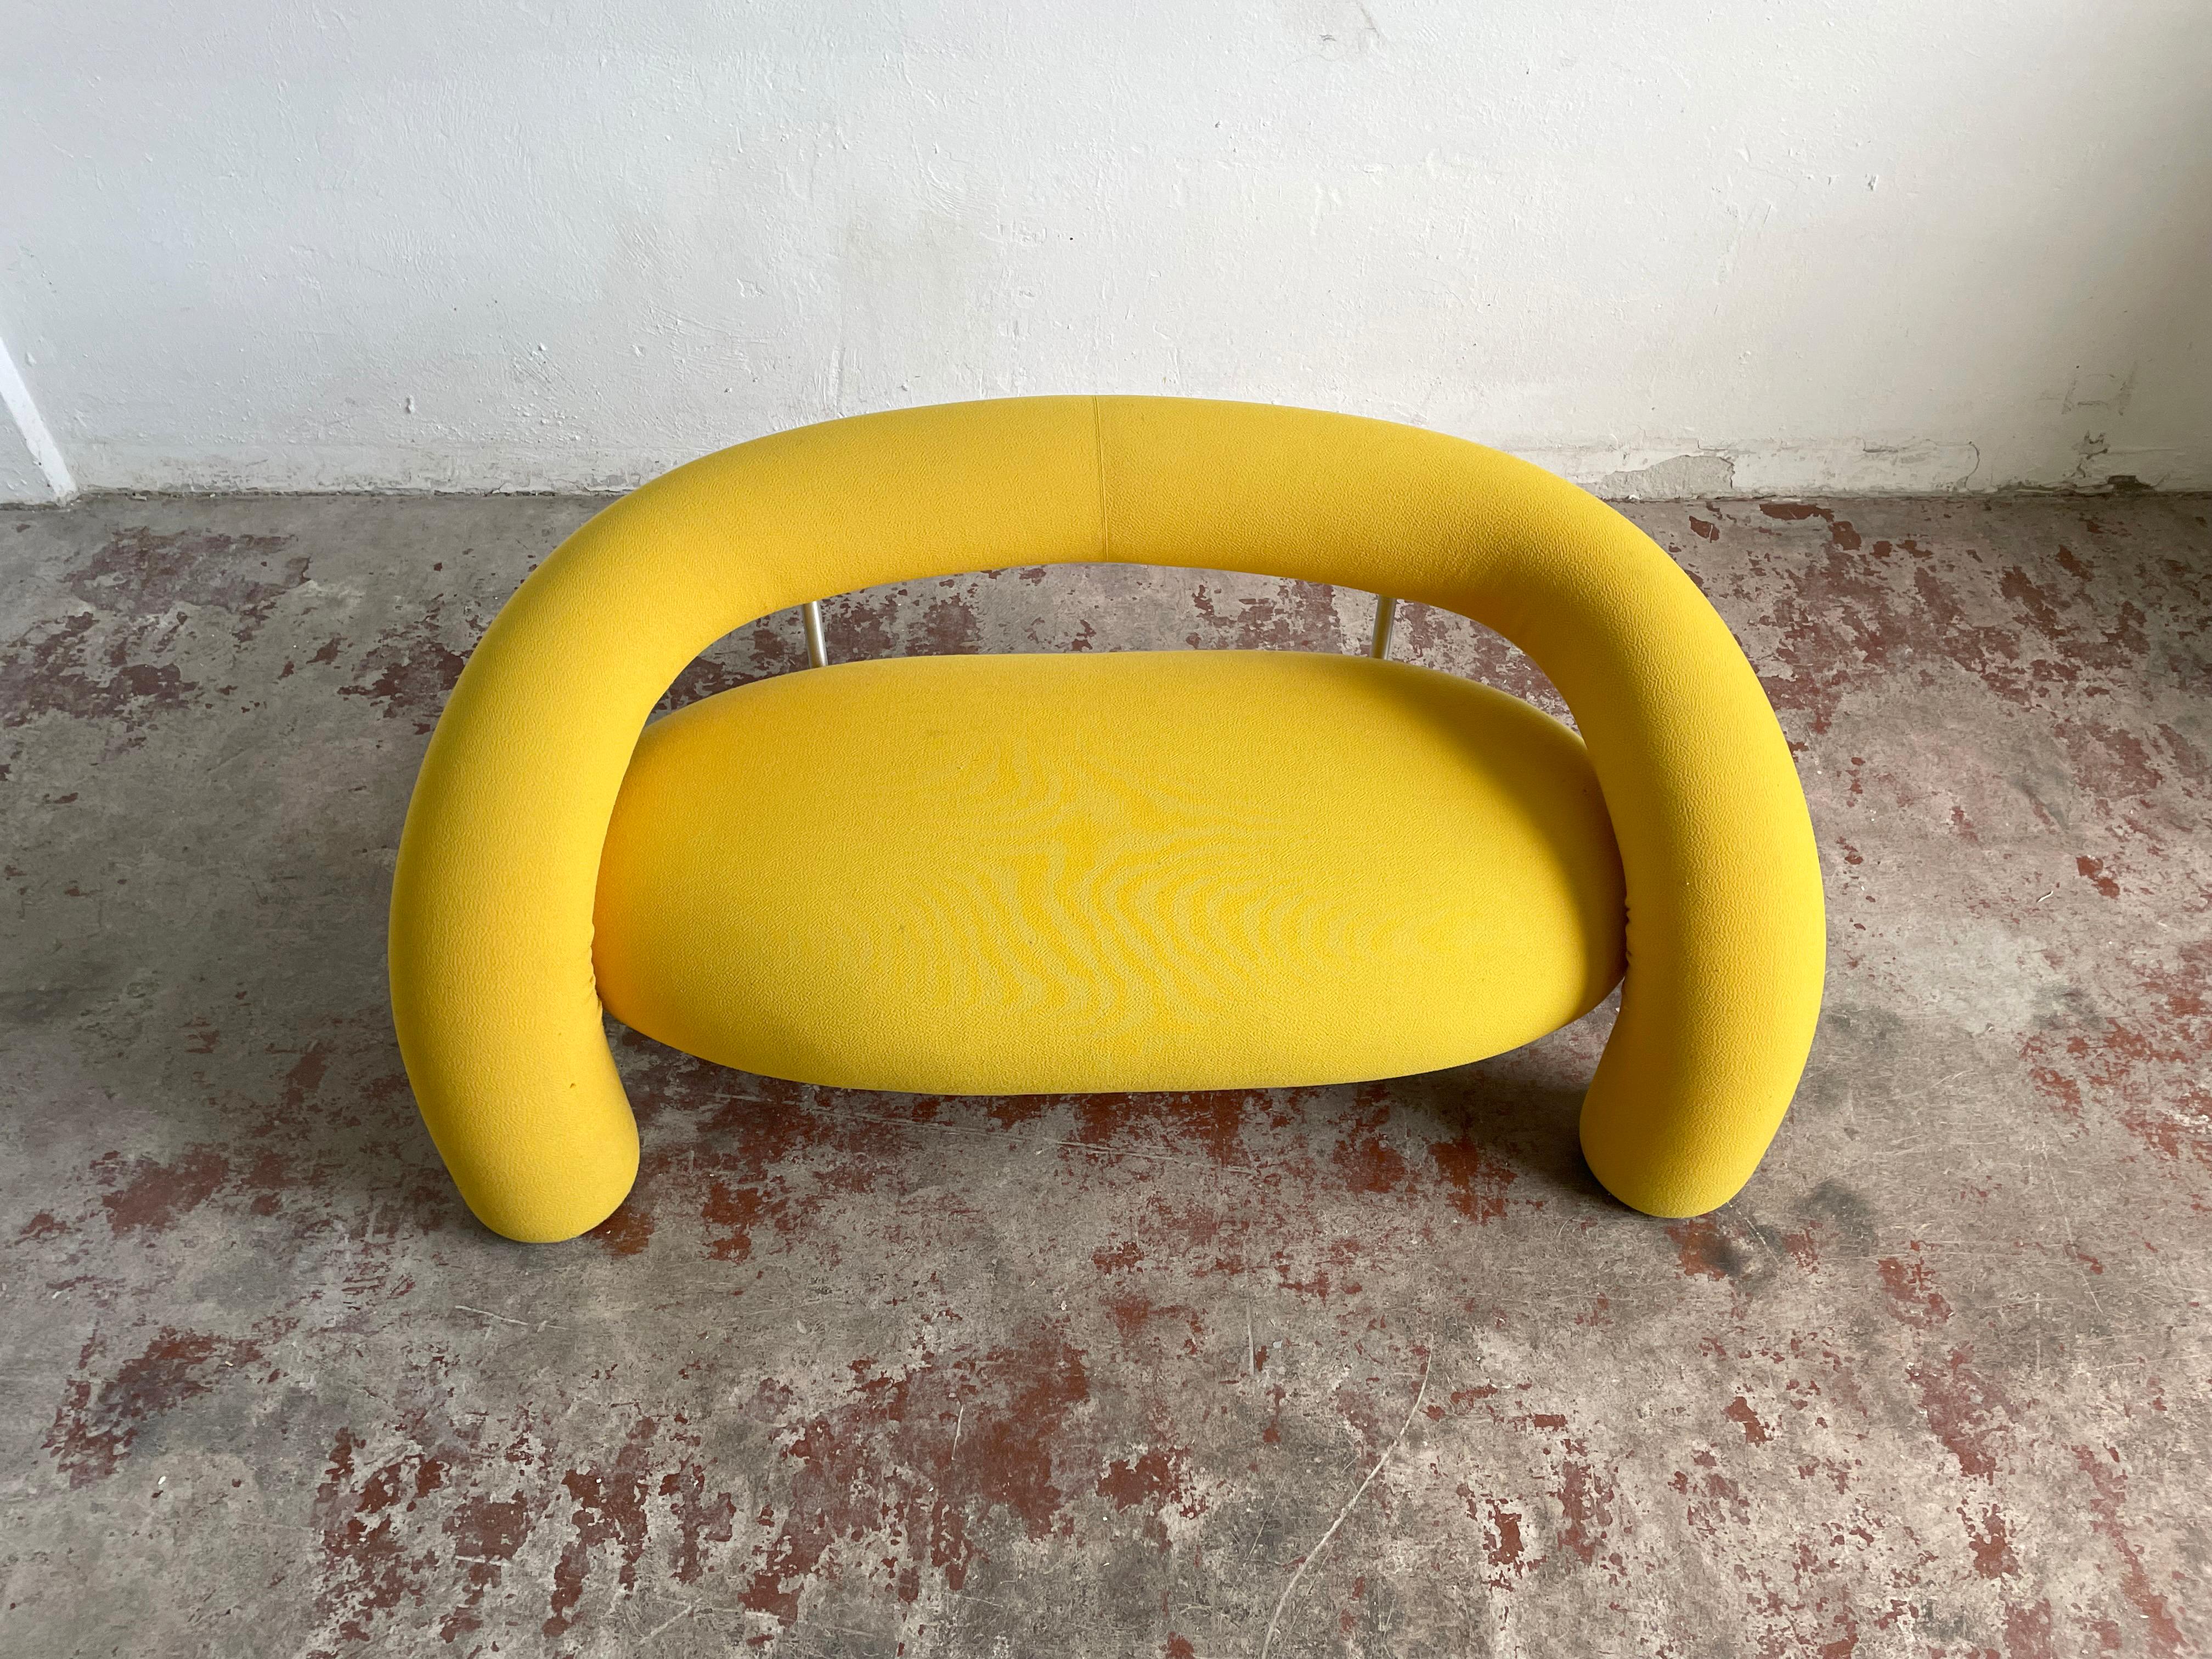 Very rare sculptural postmodern designer sofa 'Tube' designed by Anna & Carlo Bartoli for Italian high-end furniture manufacturer Rossi di Albizzate

The sofa features internal tubular metal frame, padding in polyurethane foams covered in soft